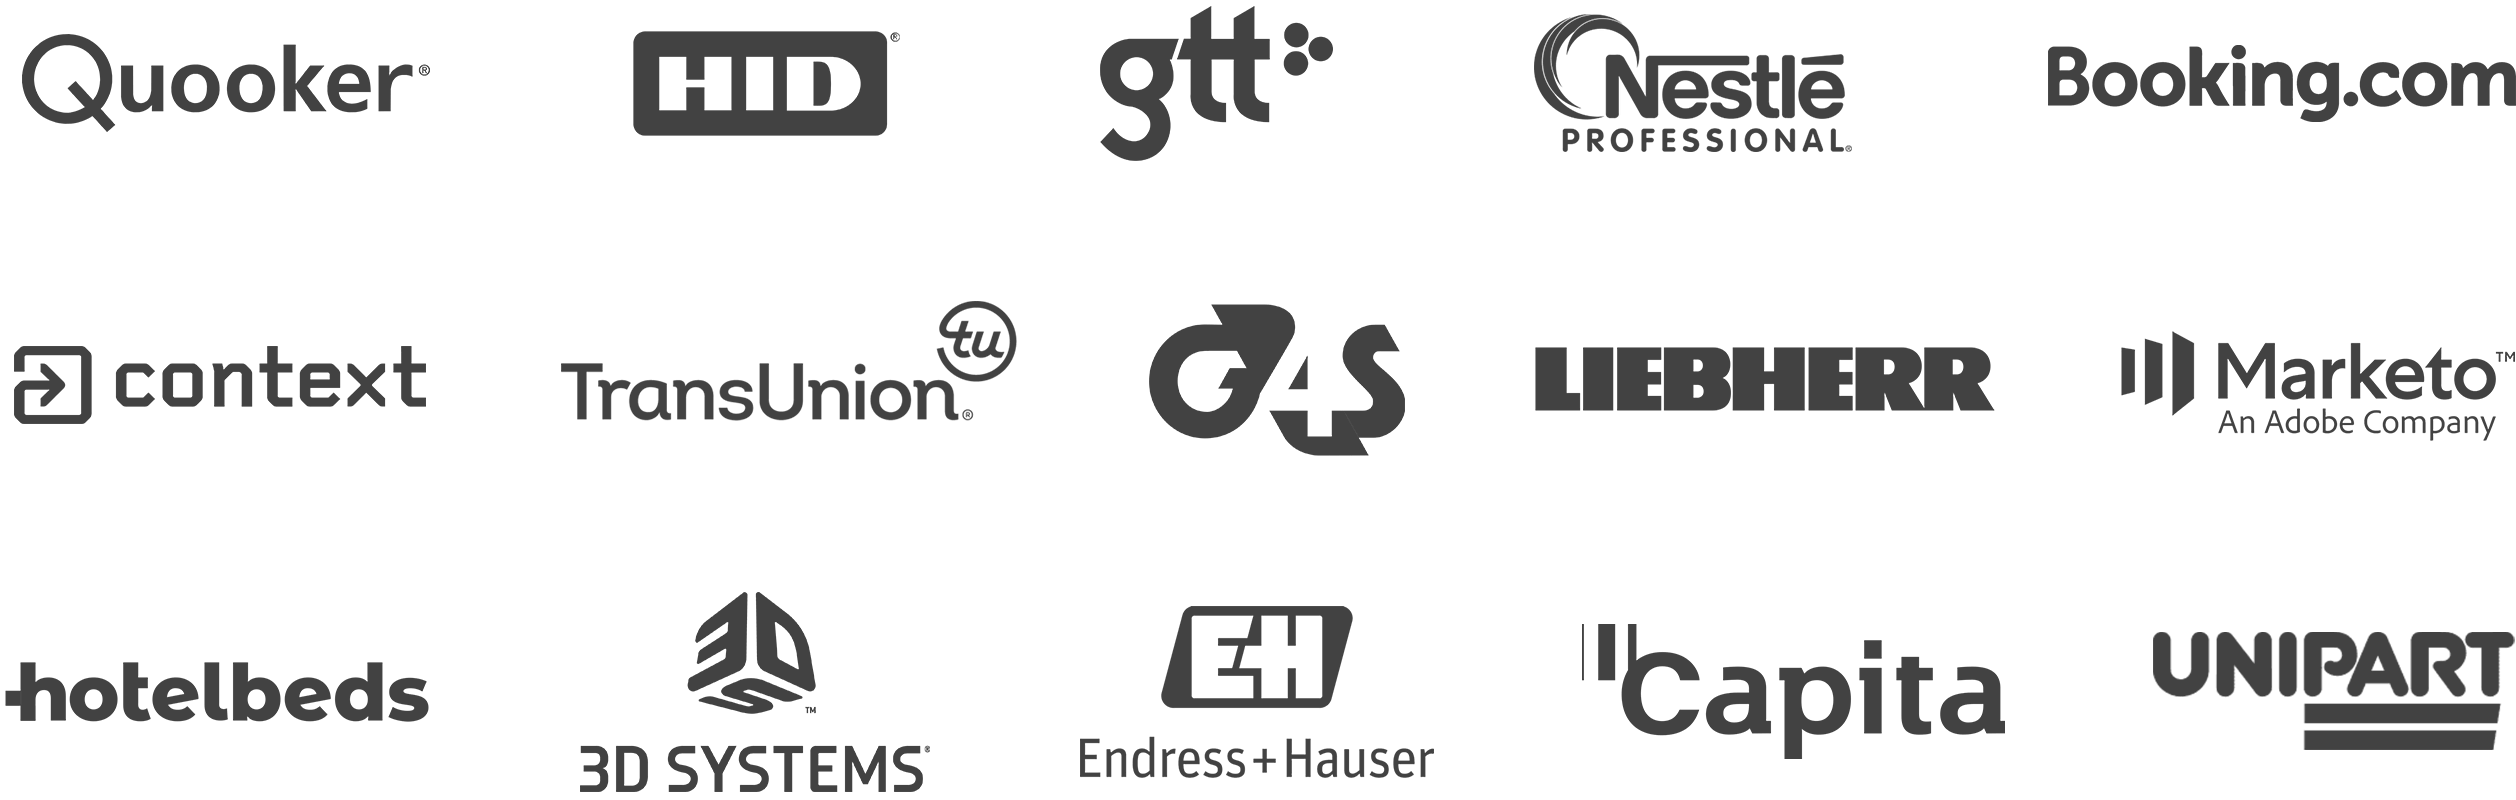 Image showing the logos of some of our consulting services clients